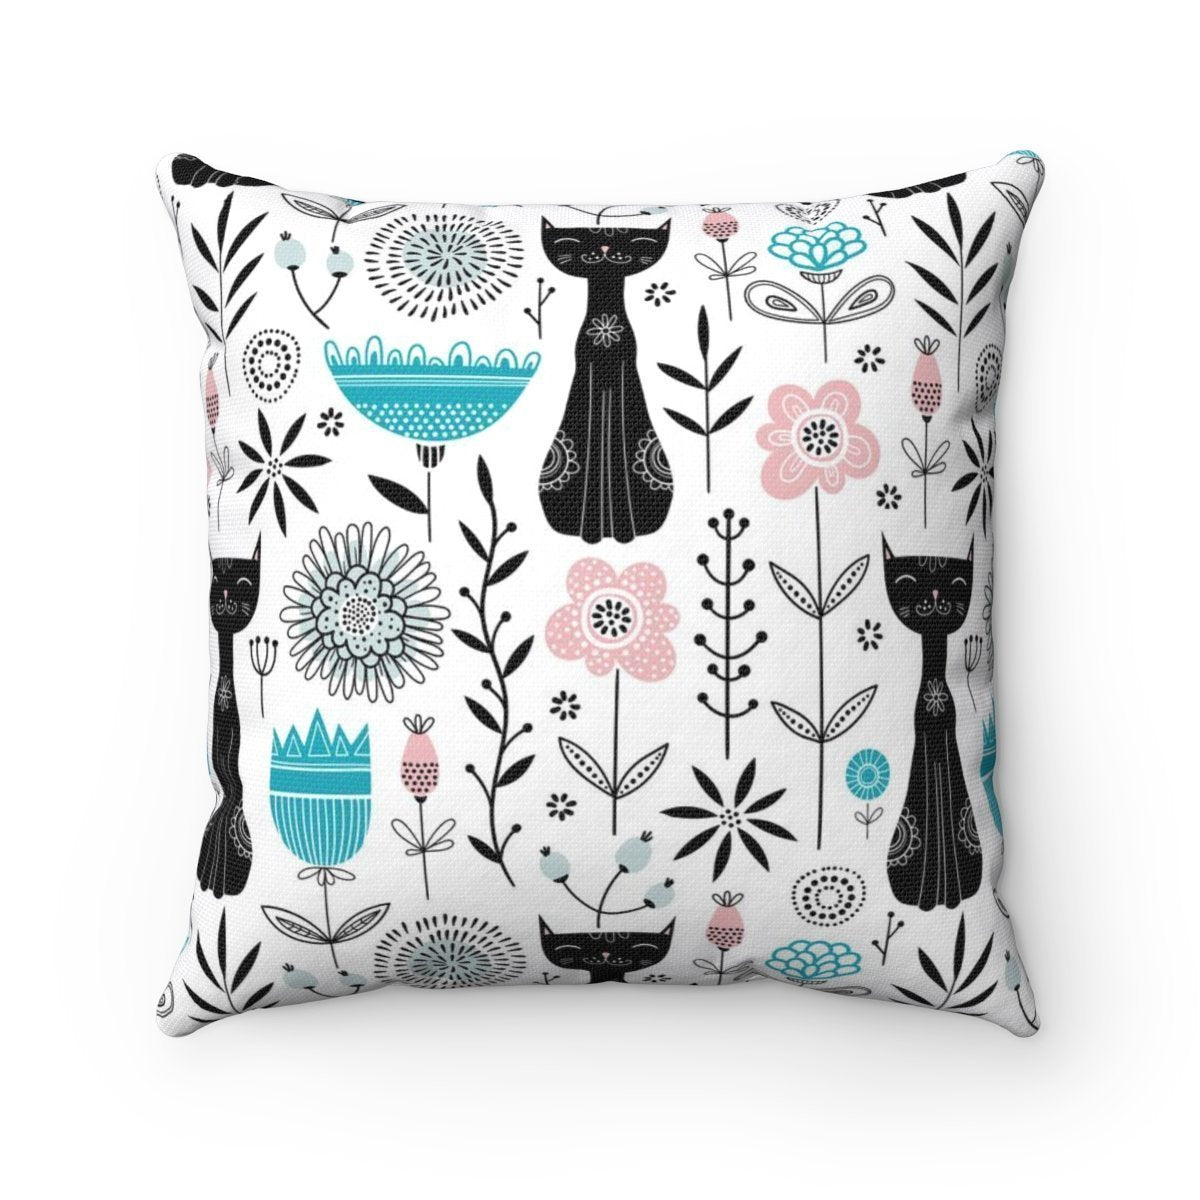 In addition to the unique black cat print, this cute cat pillow also features blue, pink, and black abstract flowers.